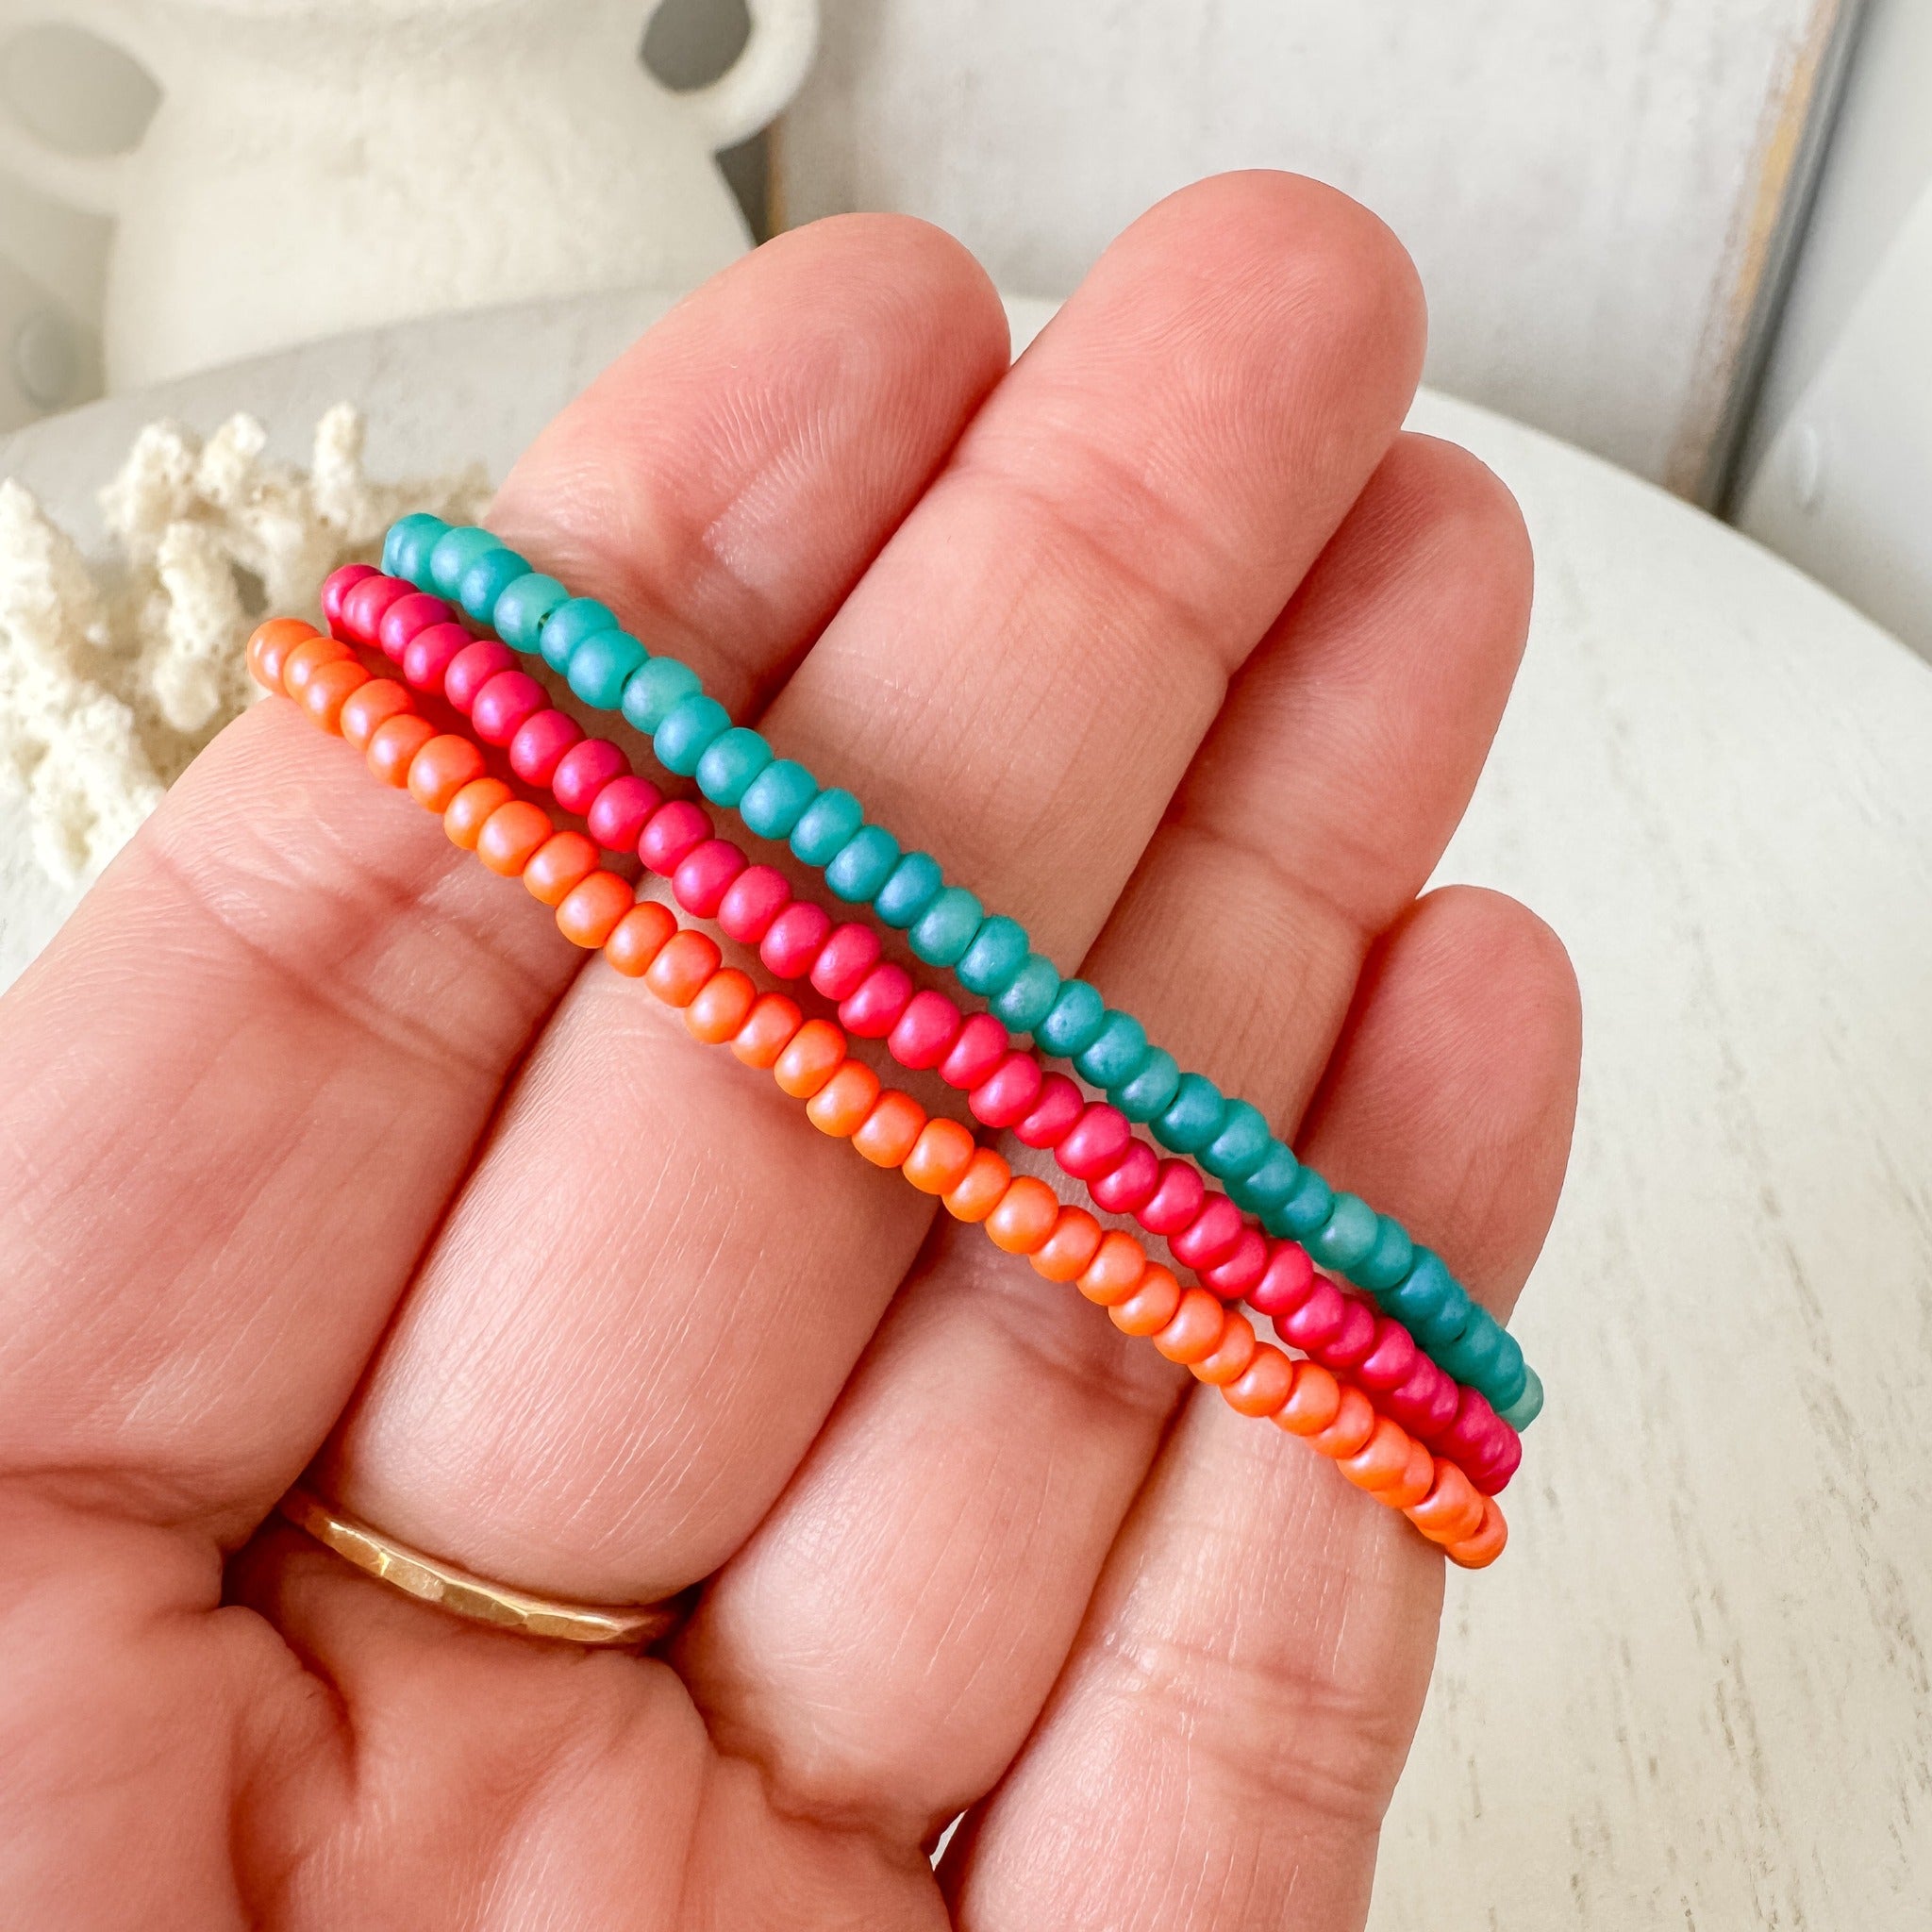 Aztec Color Collection Seed Bead Bracelet Stacking Set - Set of 3 or Each